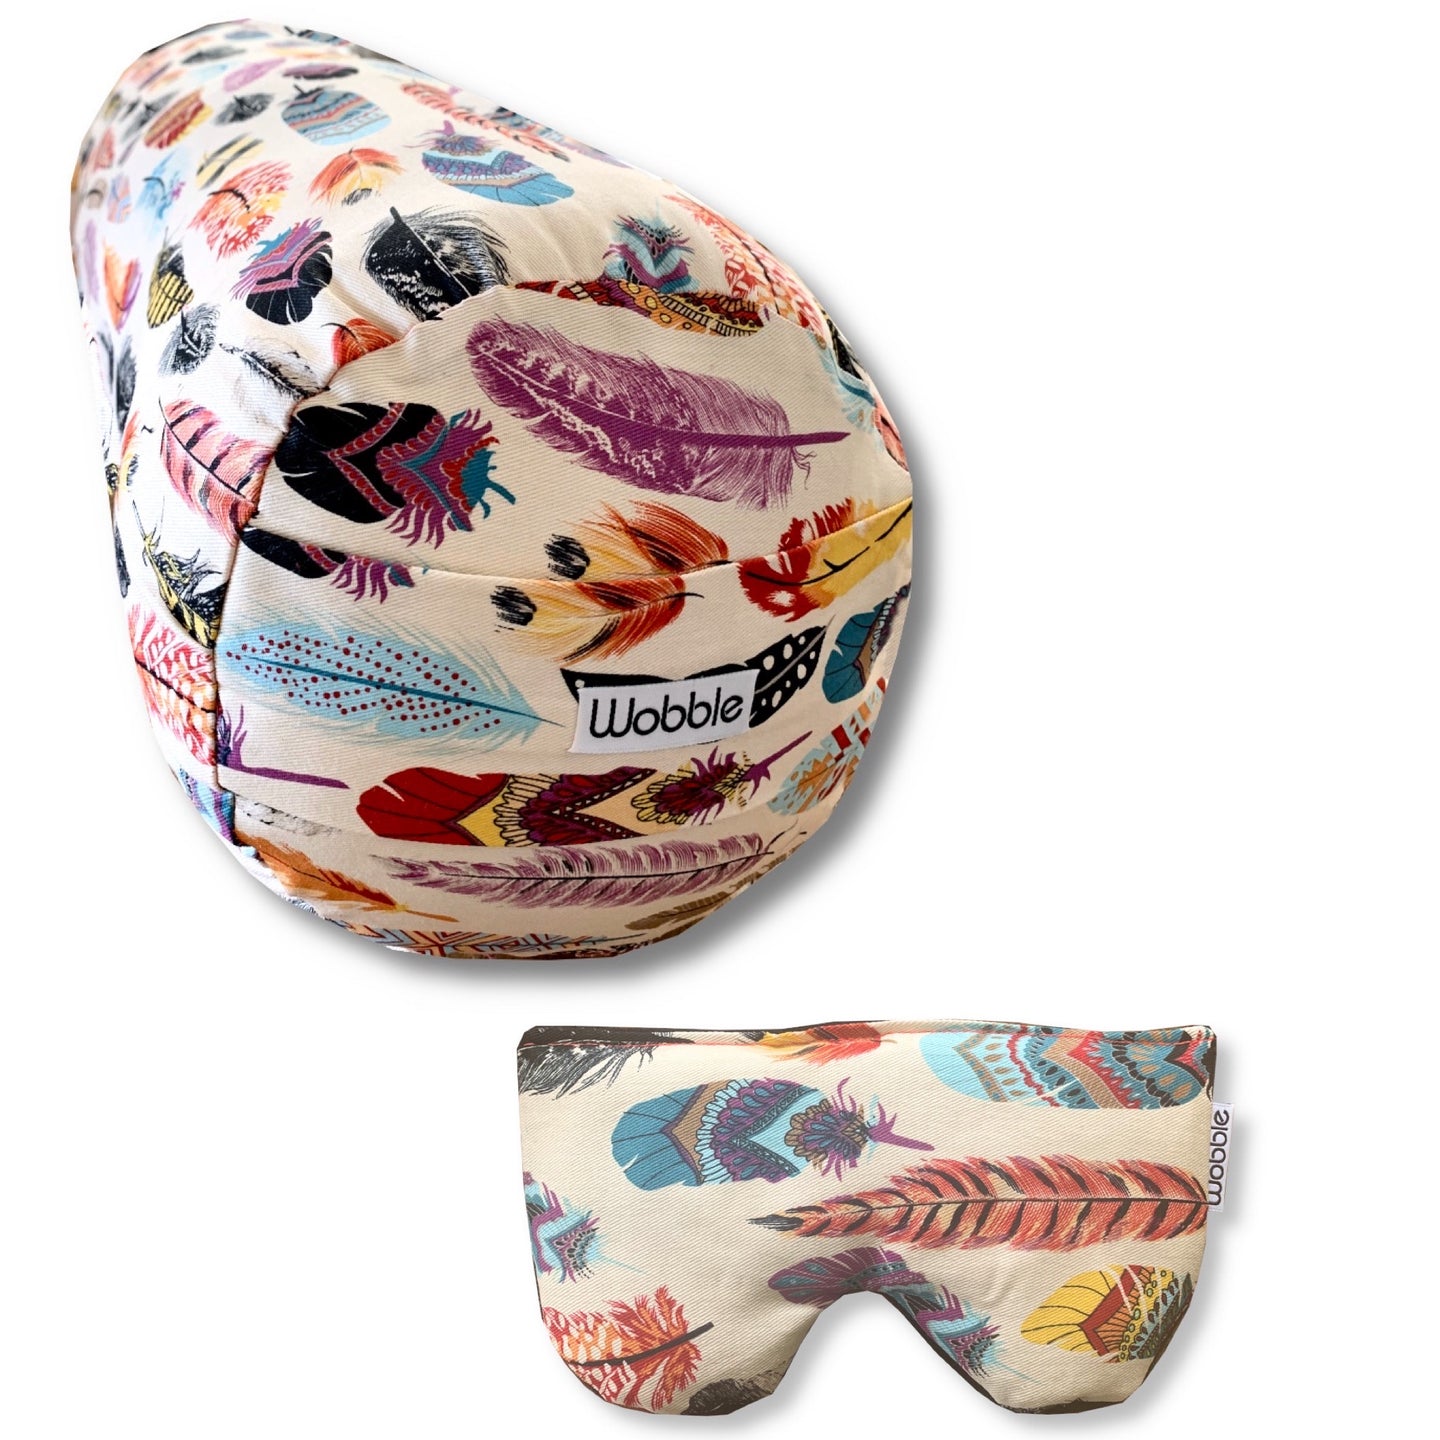 Dream Feather yoga bolster cushion and eye pillow set made using recycled plastic and organic lavender by Wobble Yoga